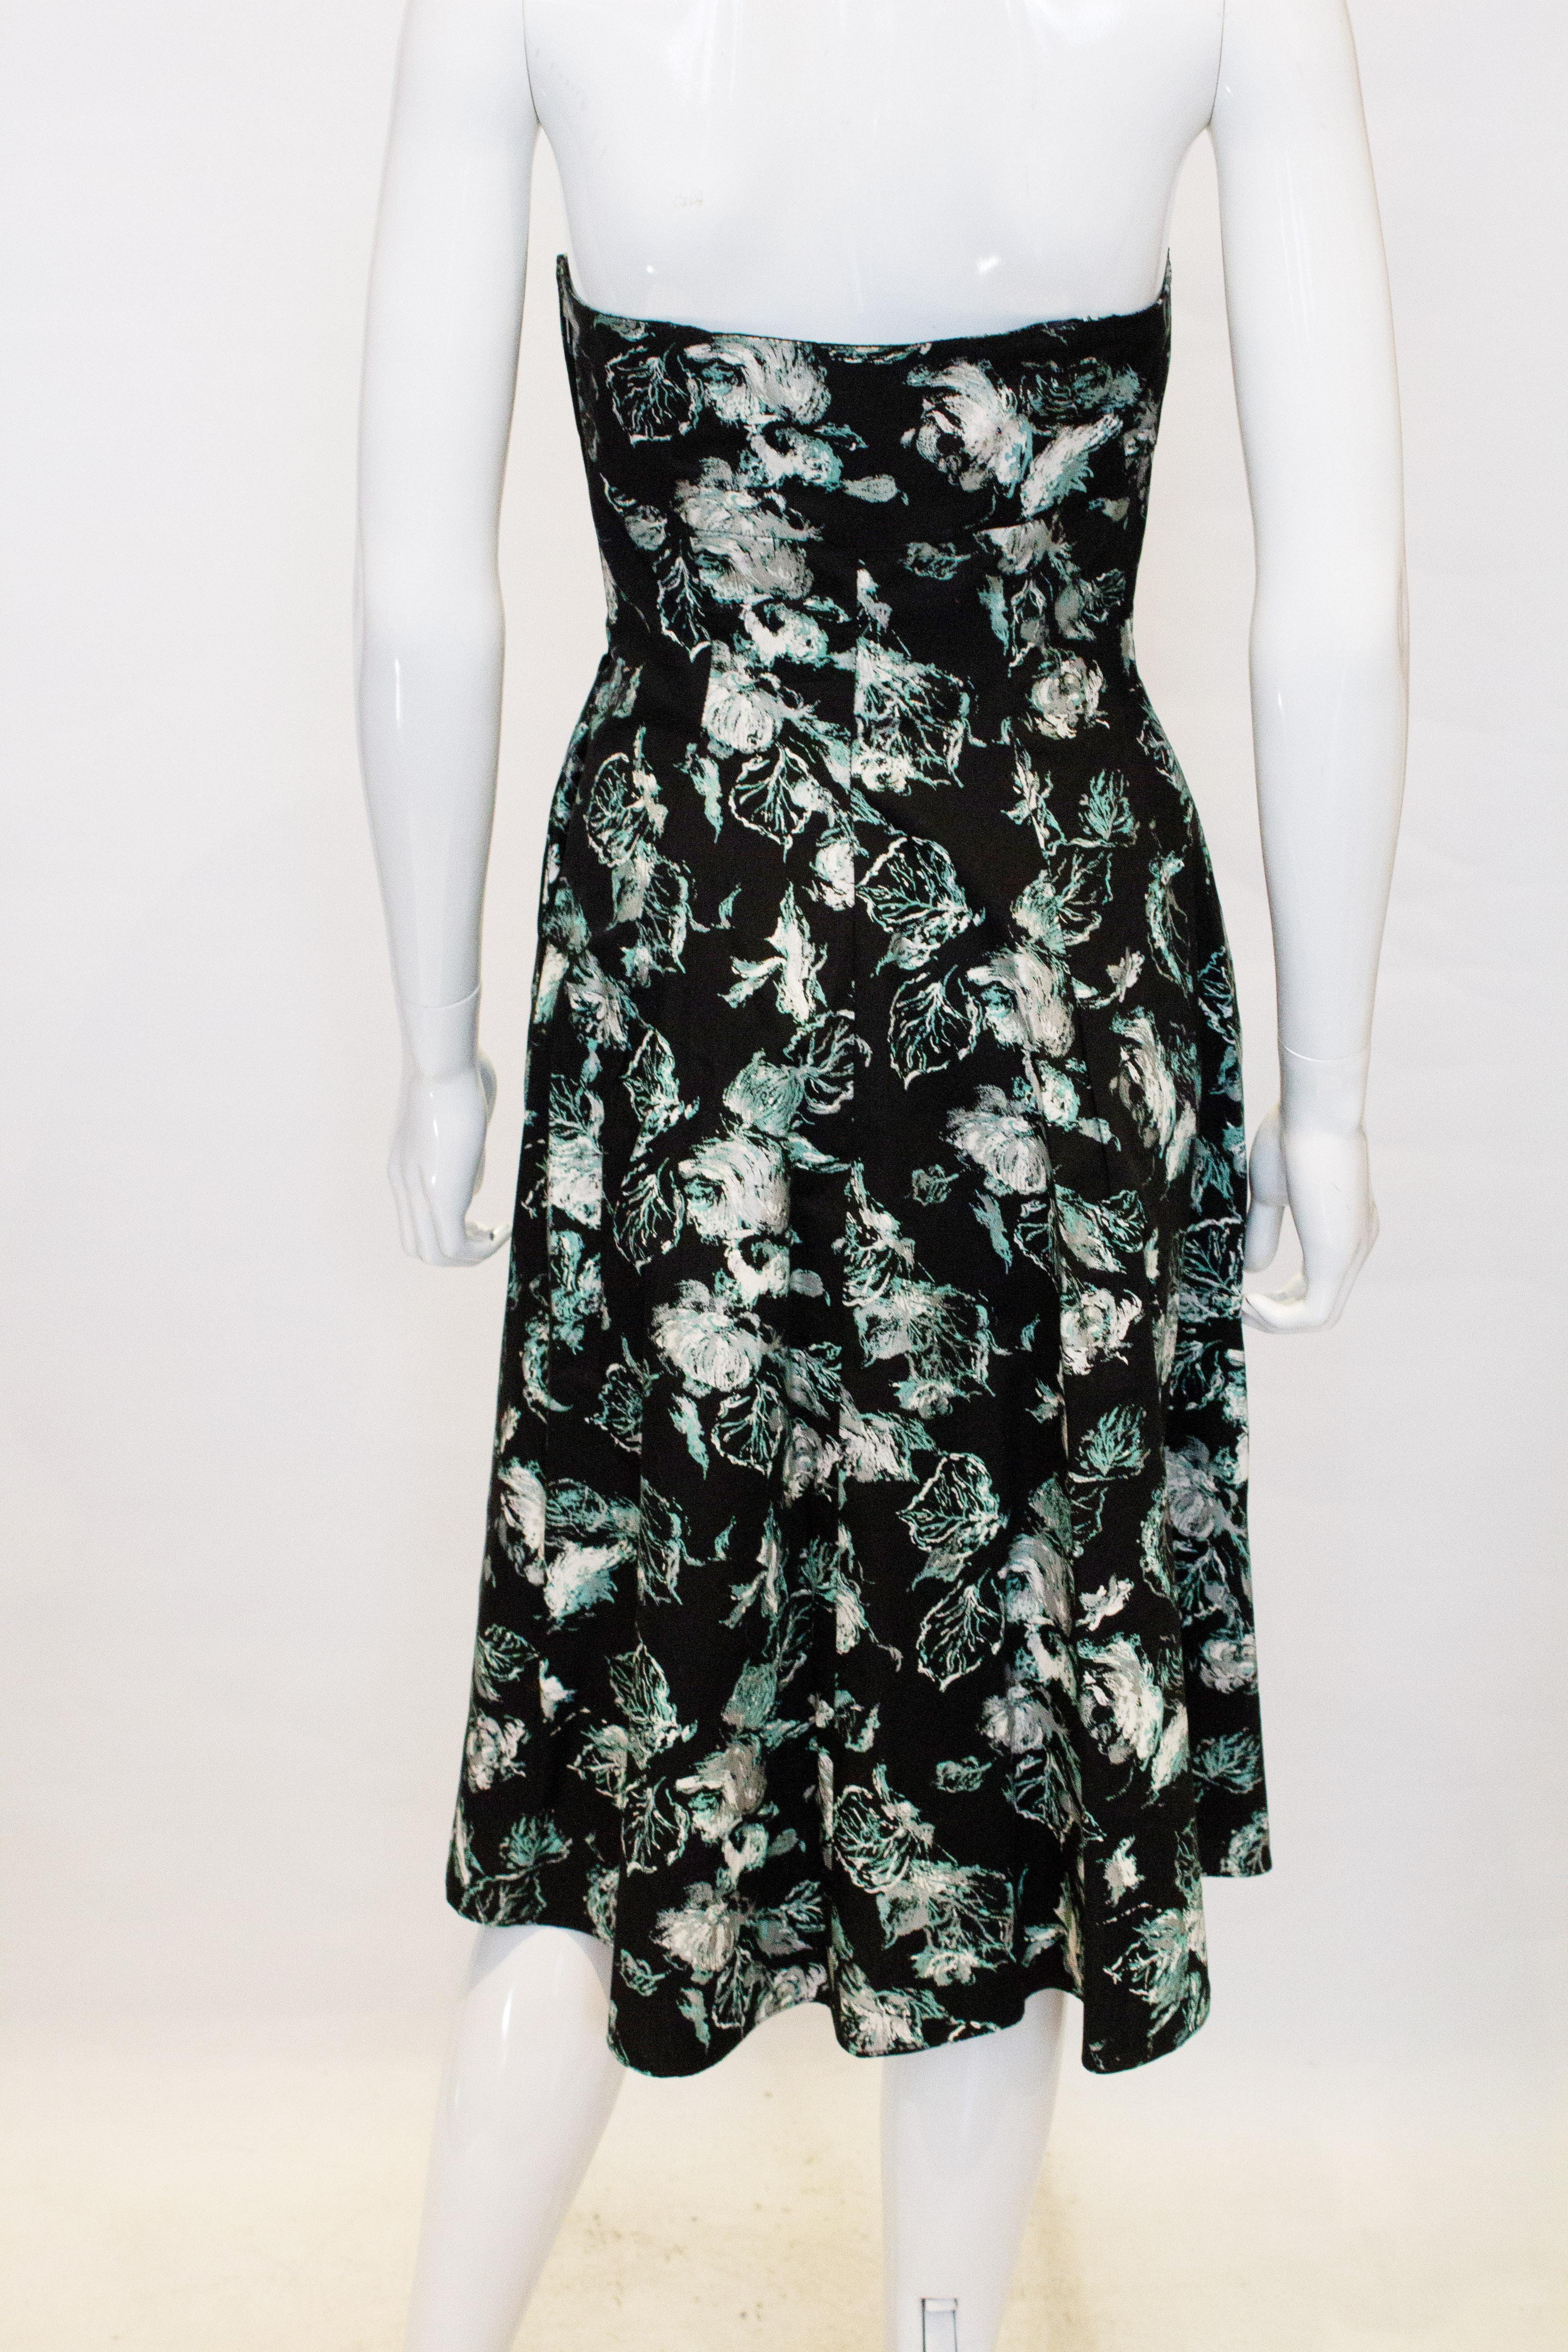 Women's Vintage Cocktail Dress in Black, Green, Ivory and Silver For Sale